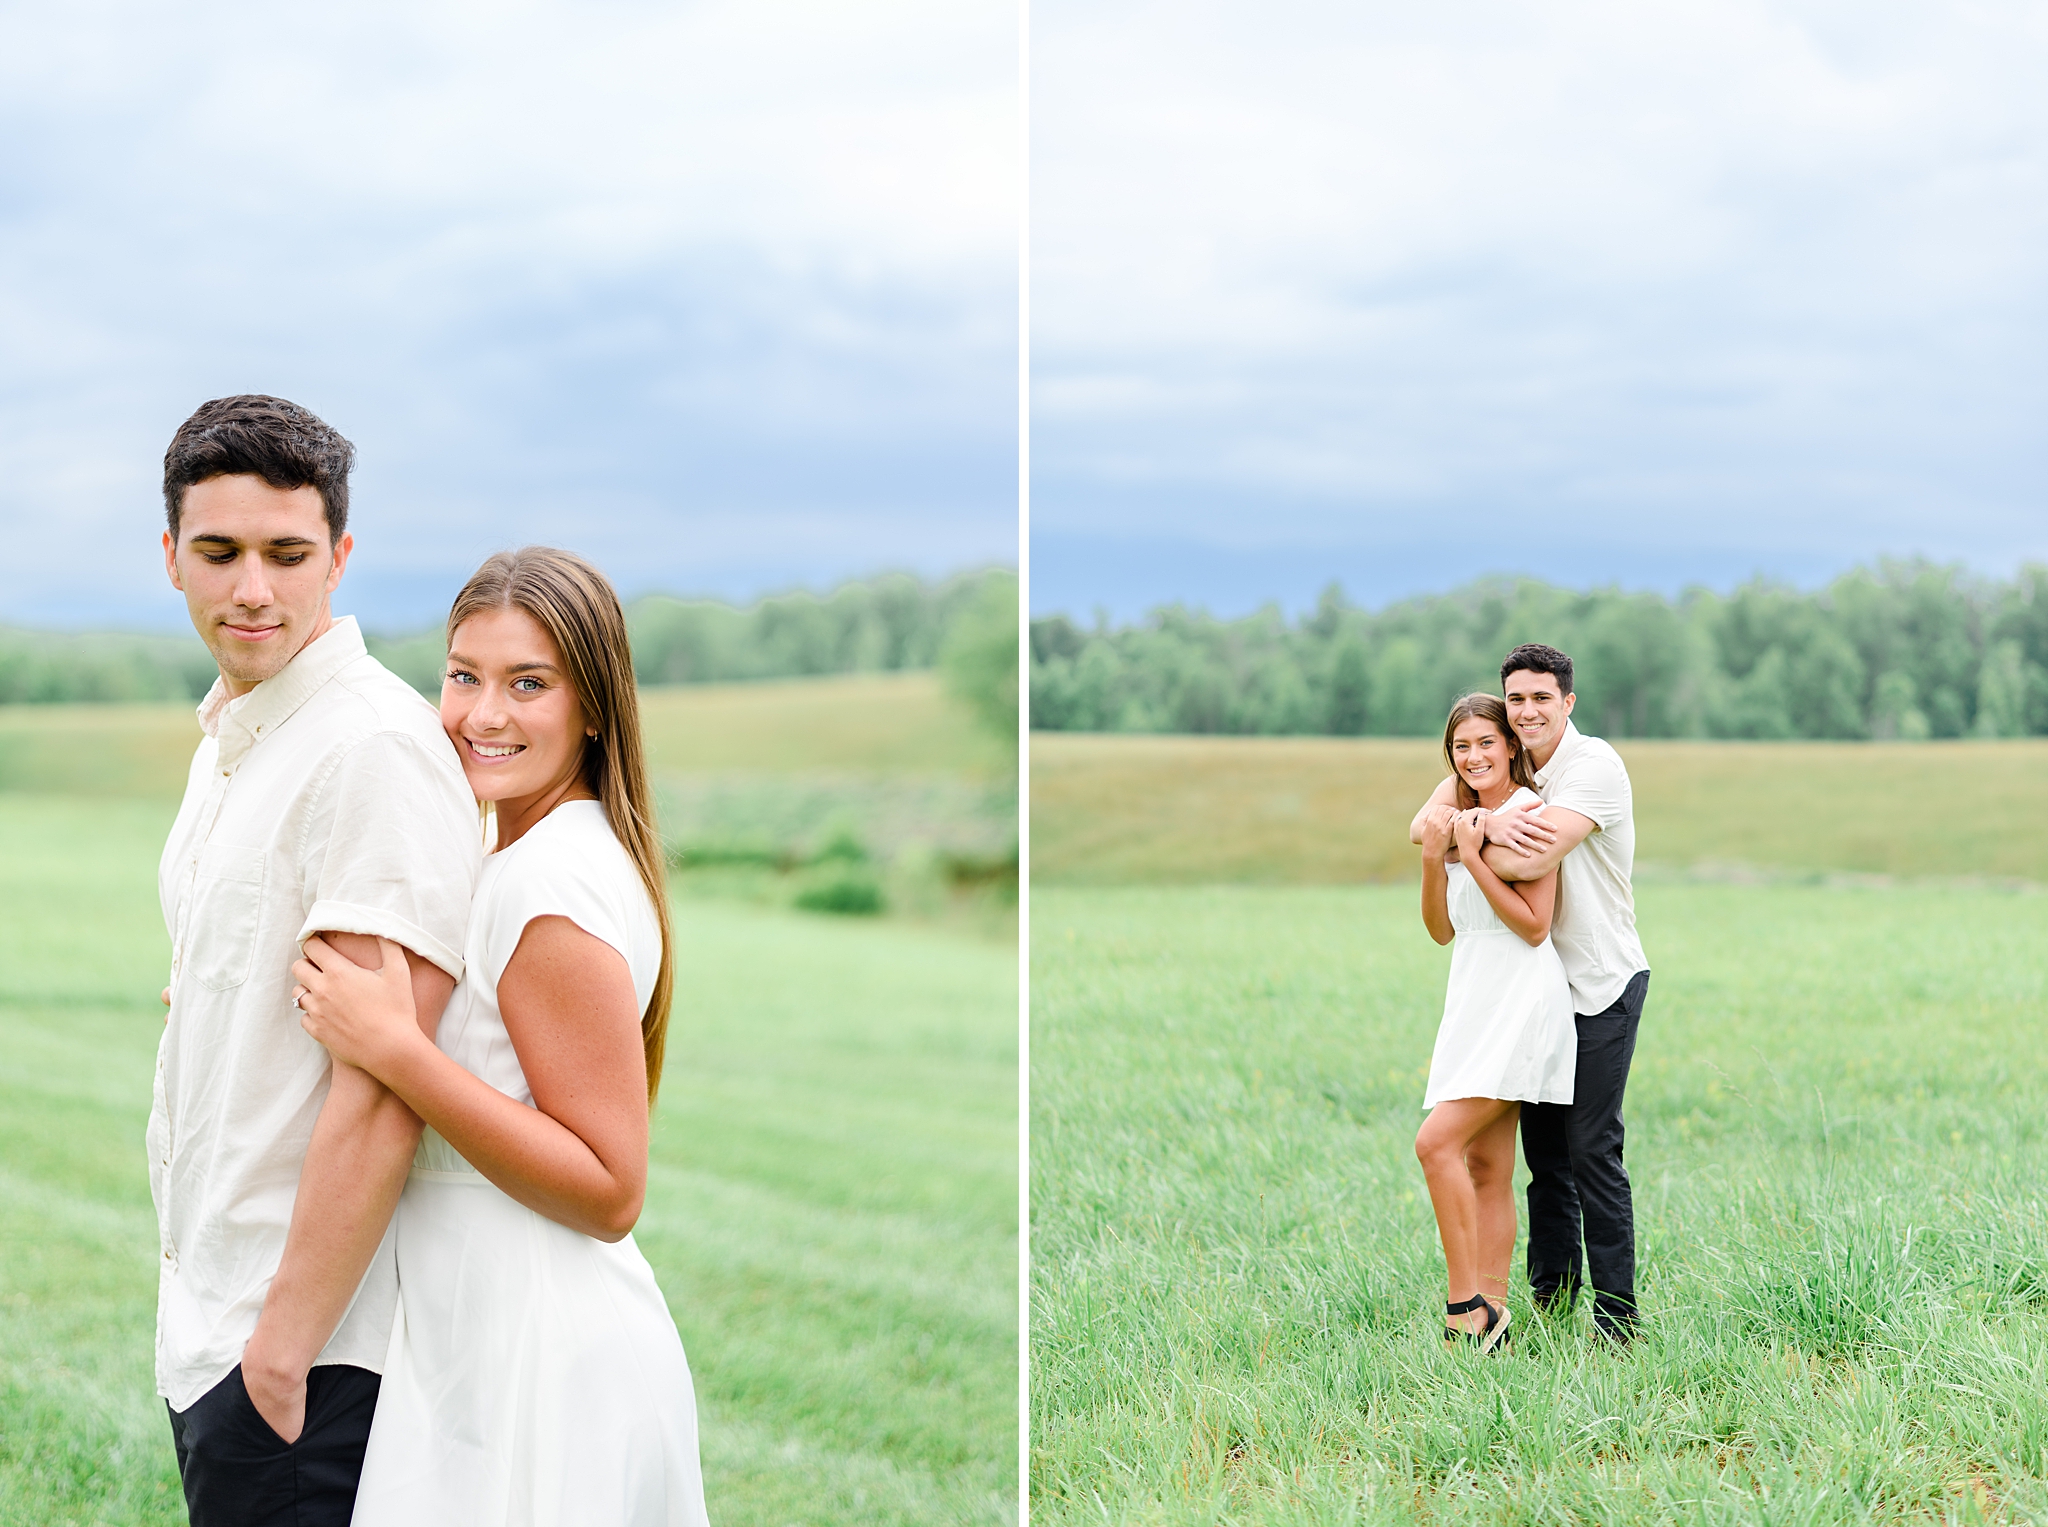 Nature and love at Cedar Oaks Farm engagement